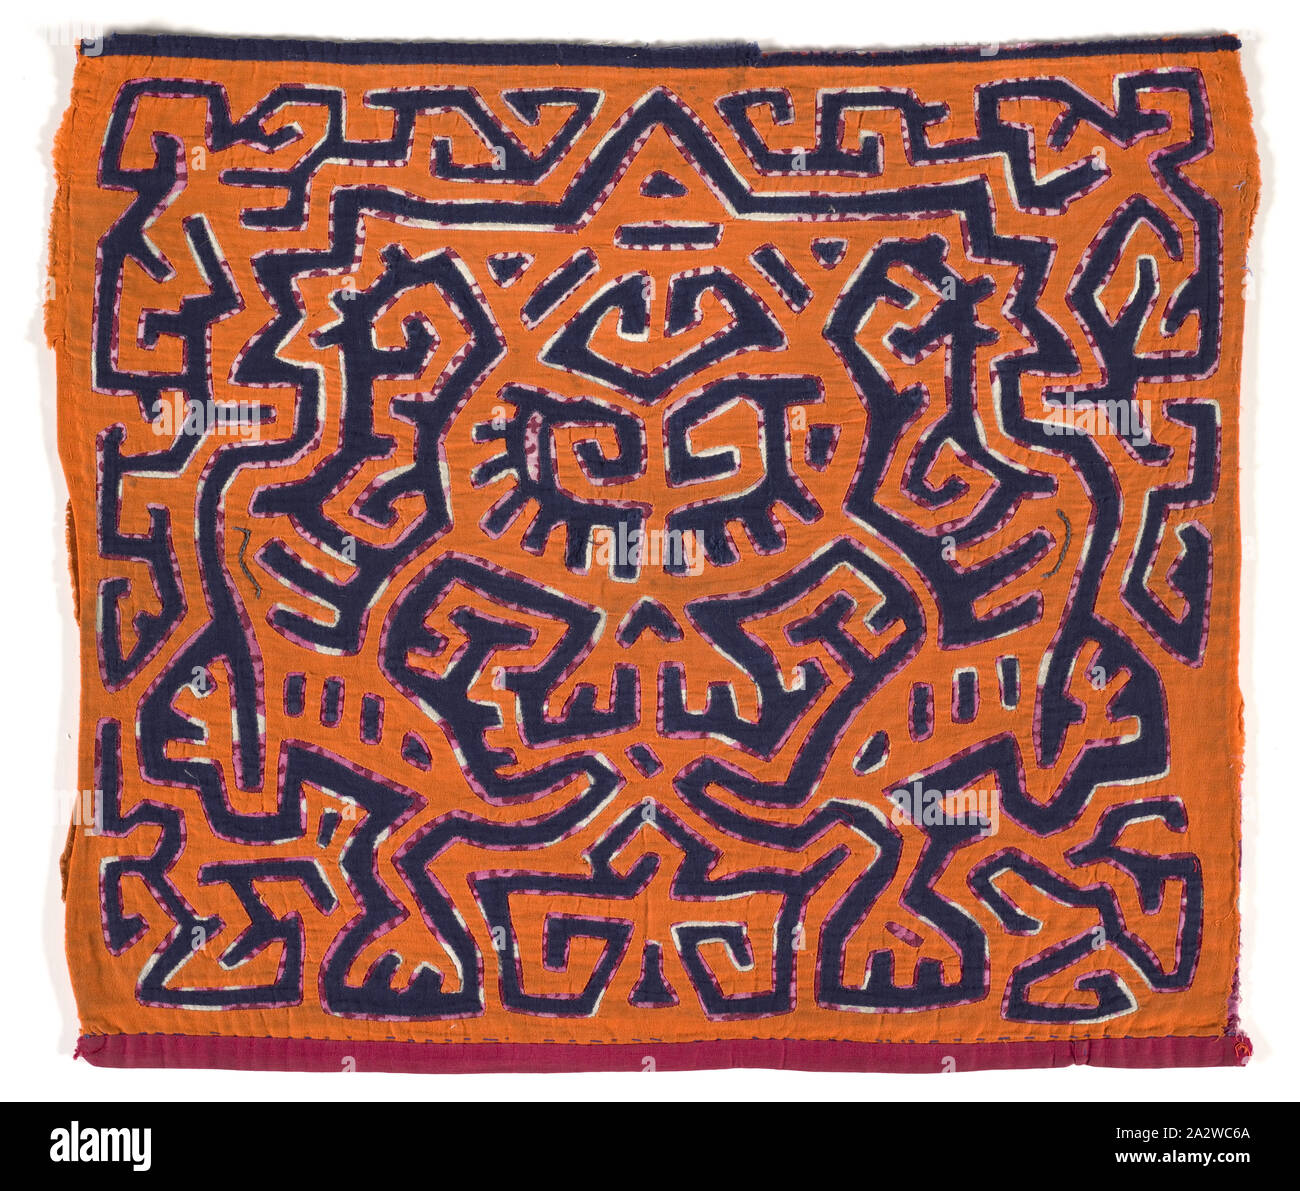 shirt panel (mola), Kuna people, about 1950s, appliqued cotton, 16-7/8 x 19-3/4 in., Textile and Fashion Arts Stock Photo